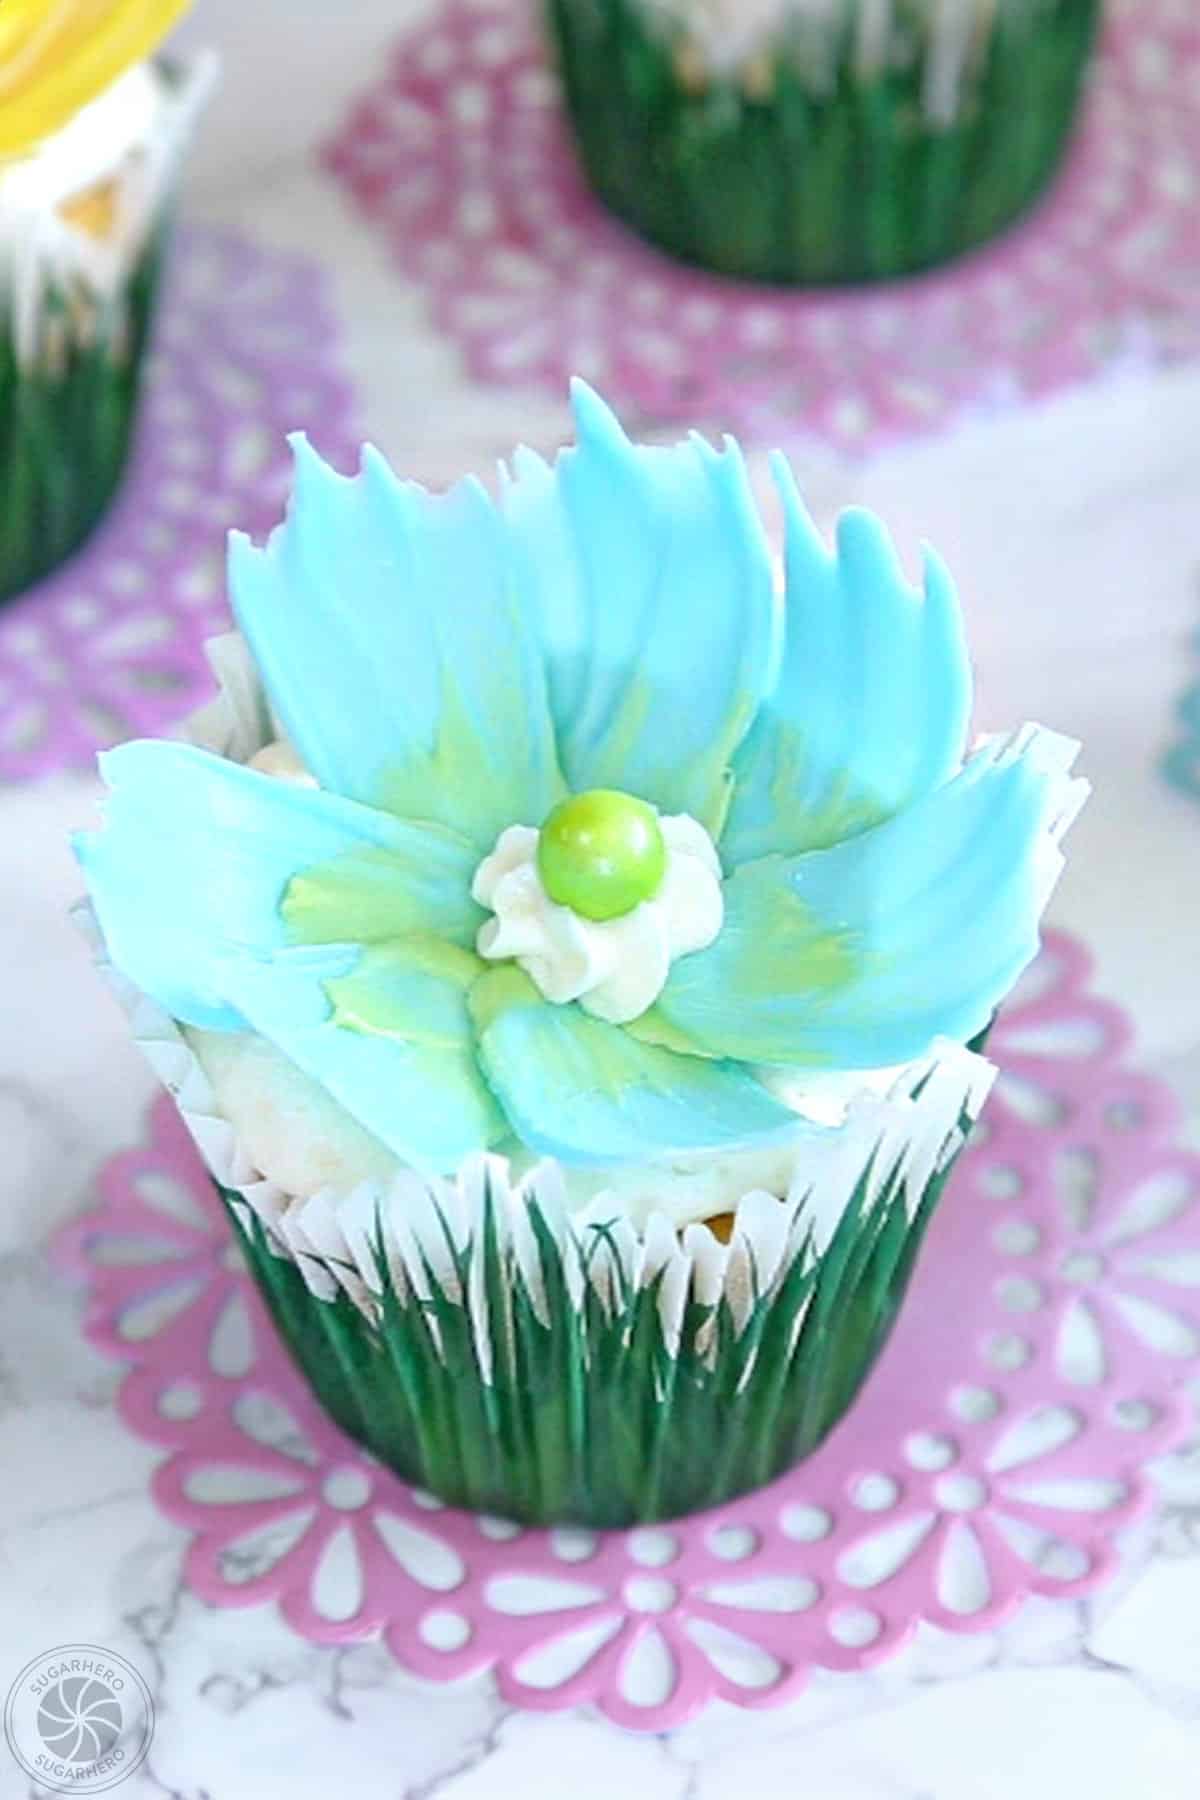 A cupcake topped with a blue candy melt flower.